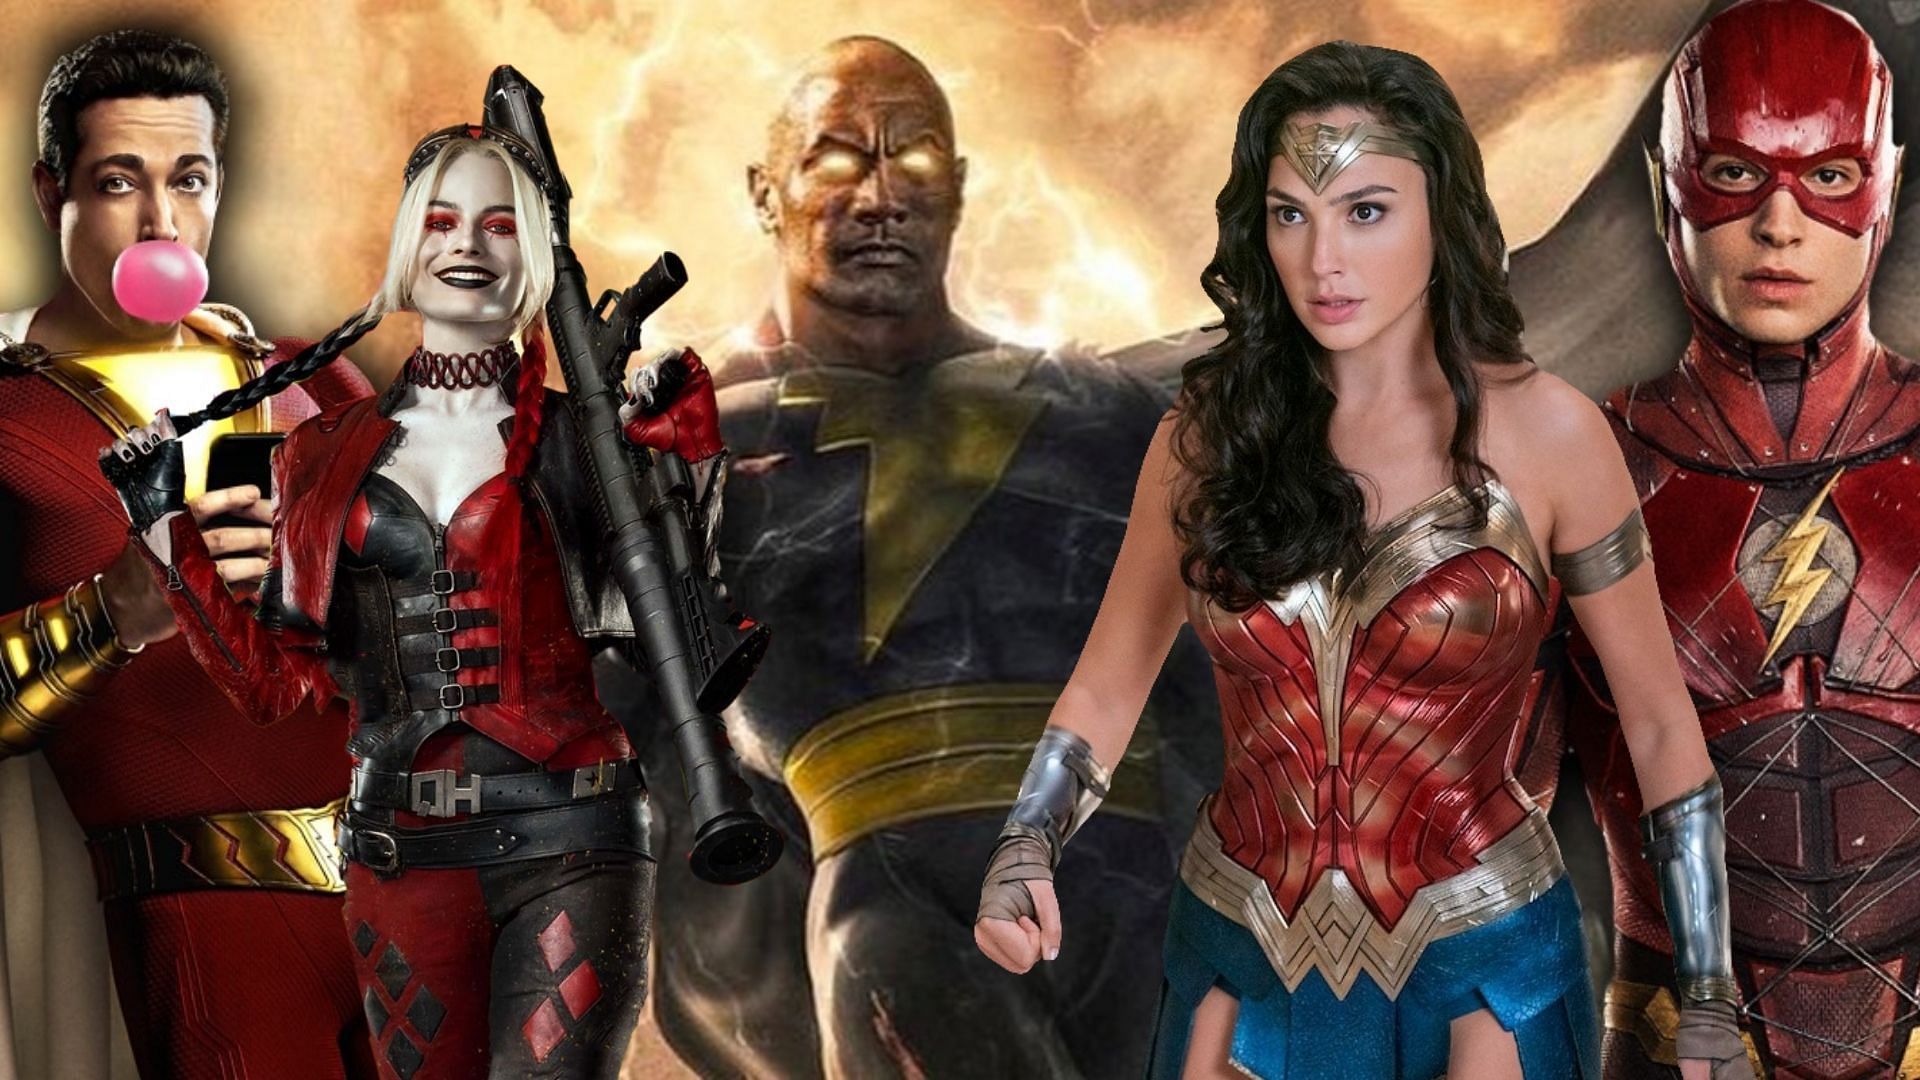 DCEU: How 'The Suicide Squad' Differs from the First Movie, Why 1